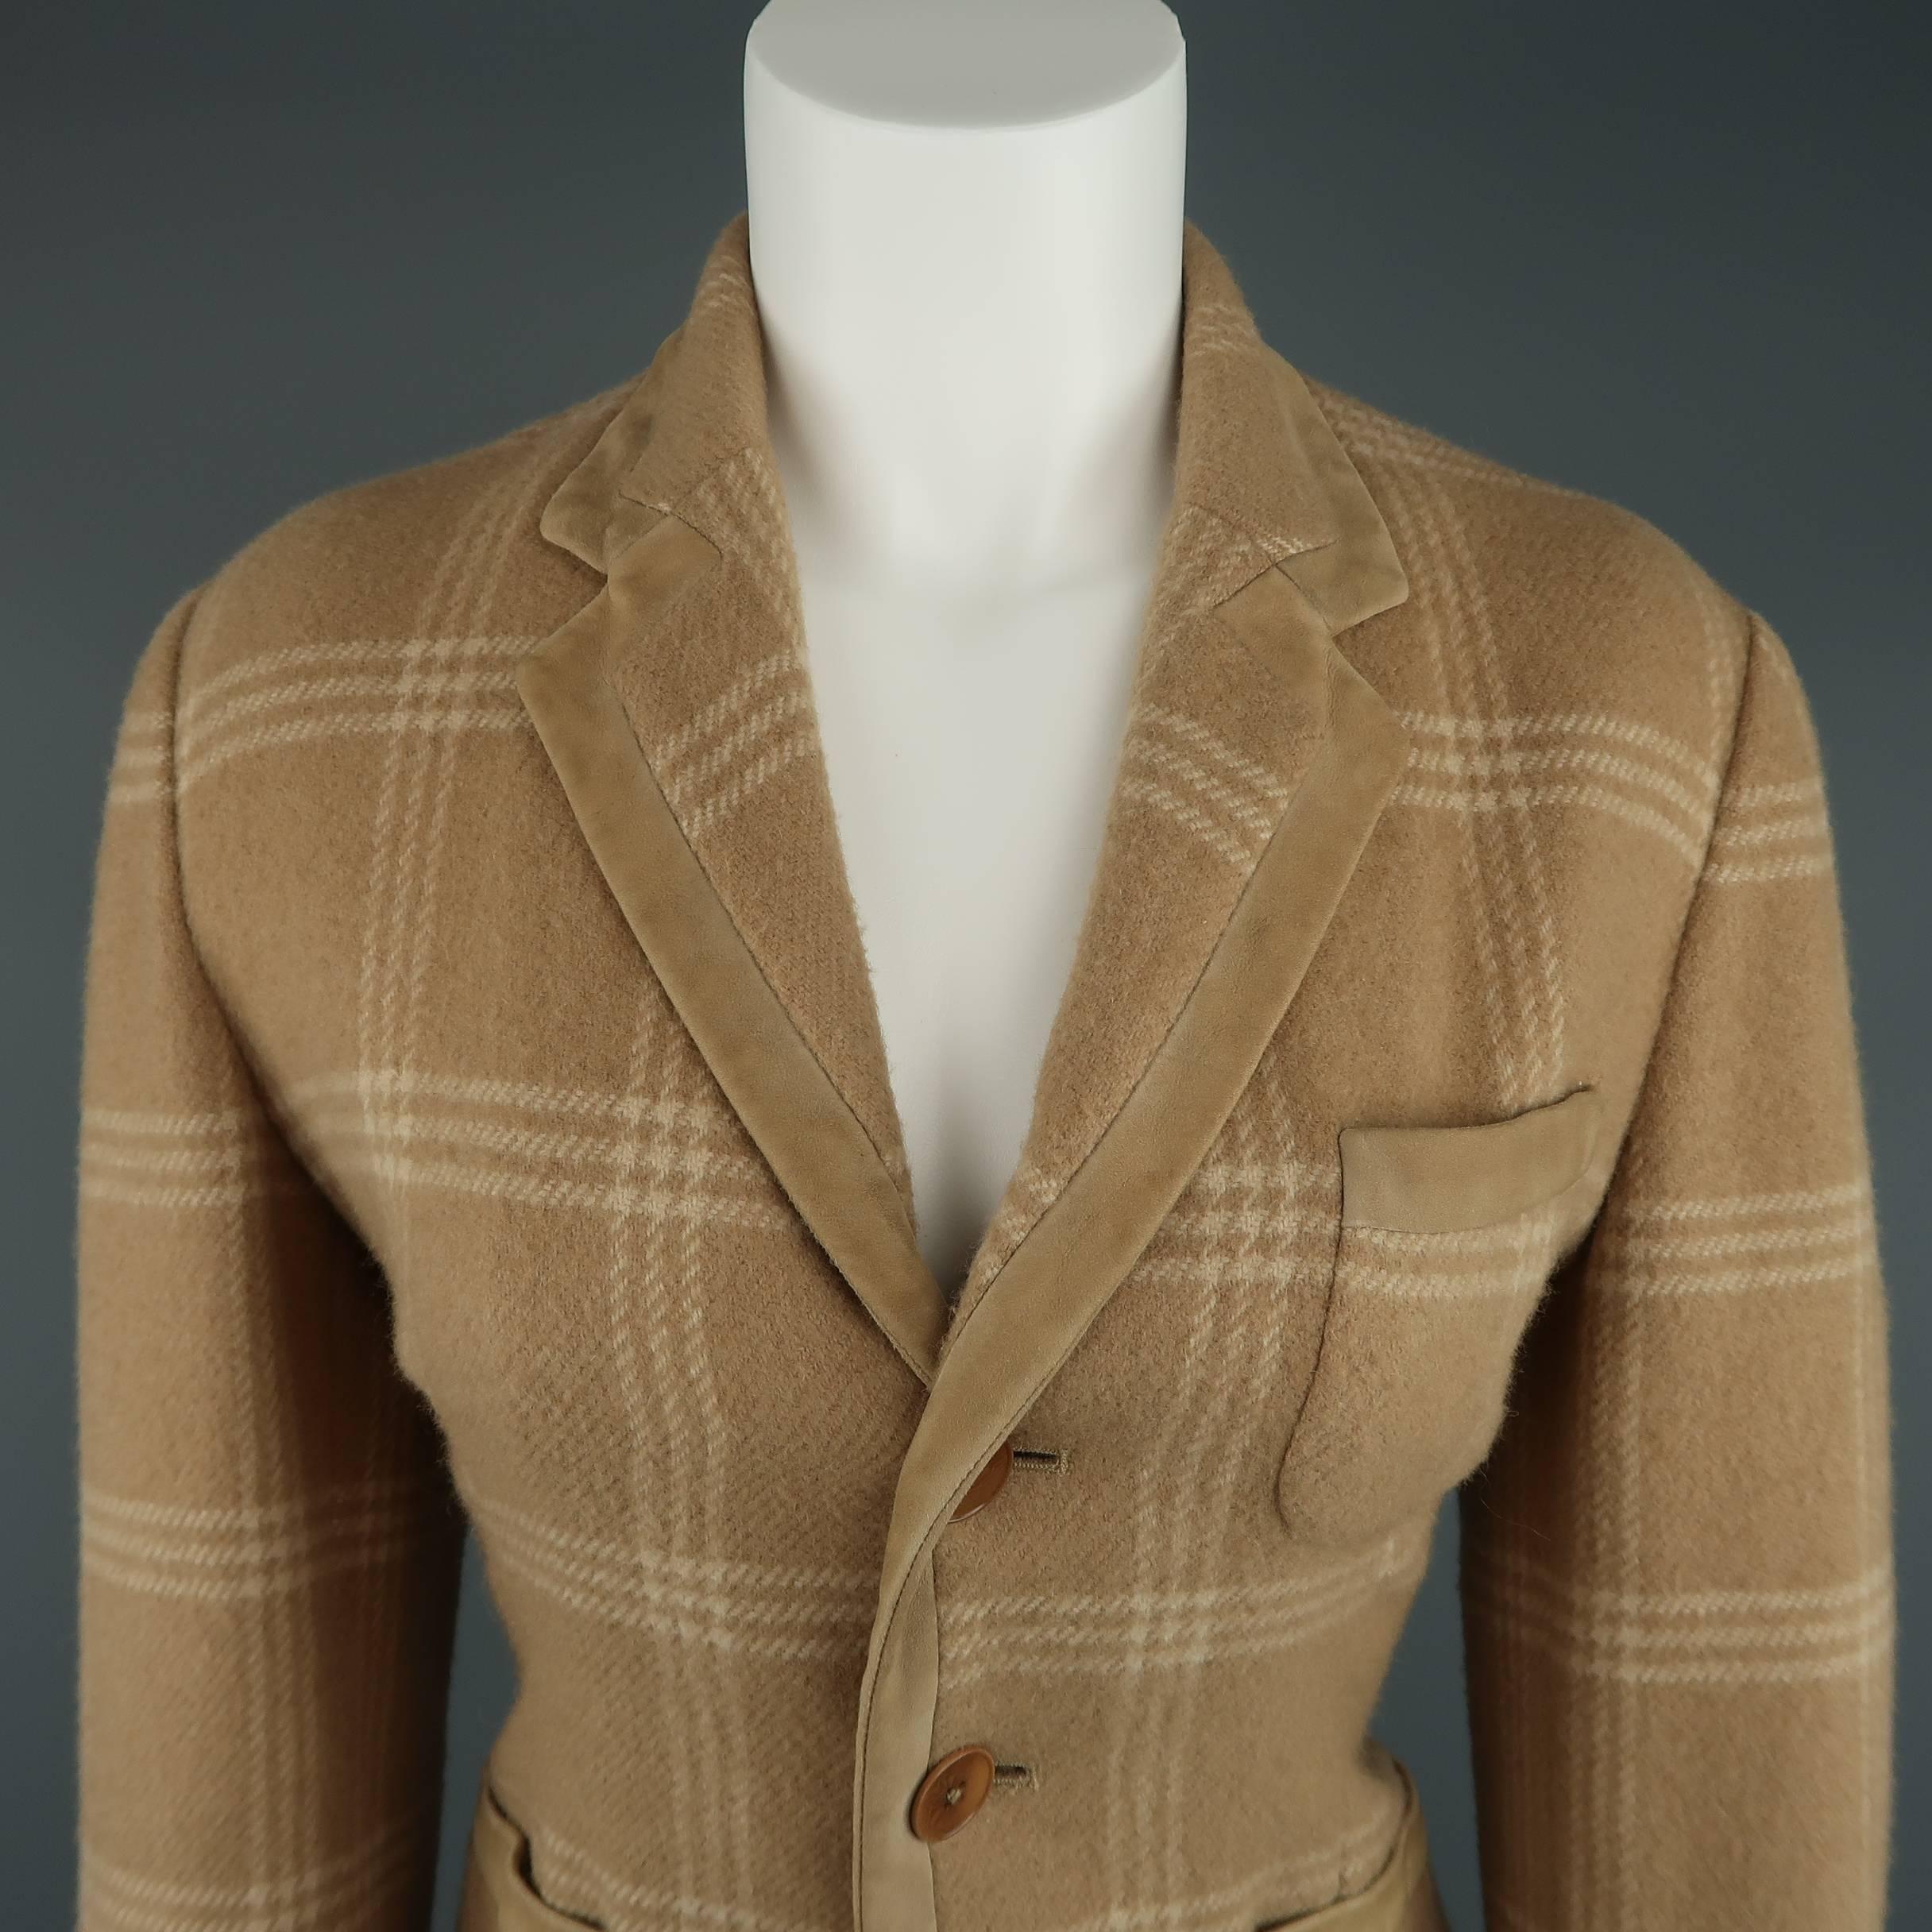 RALPH LAUREN COLLECTION jacket comes in a camel and beige plaid wool and features a notch lapel, three button closure, and thick suede piping details throughout. Wear throughout suede. Made in USA.
 
Good Pre-Owned Condition.
Marked: US 8
